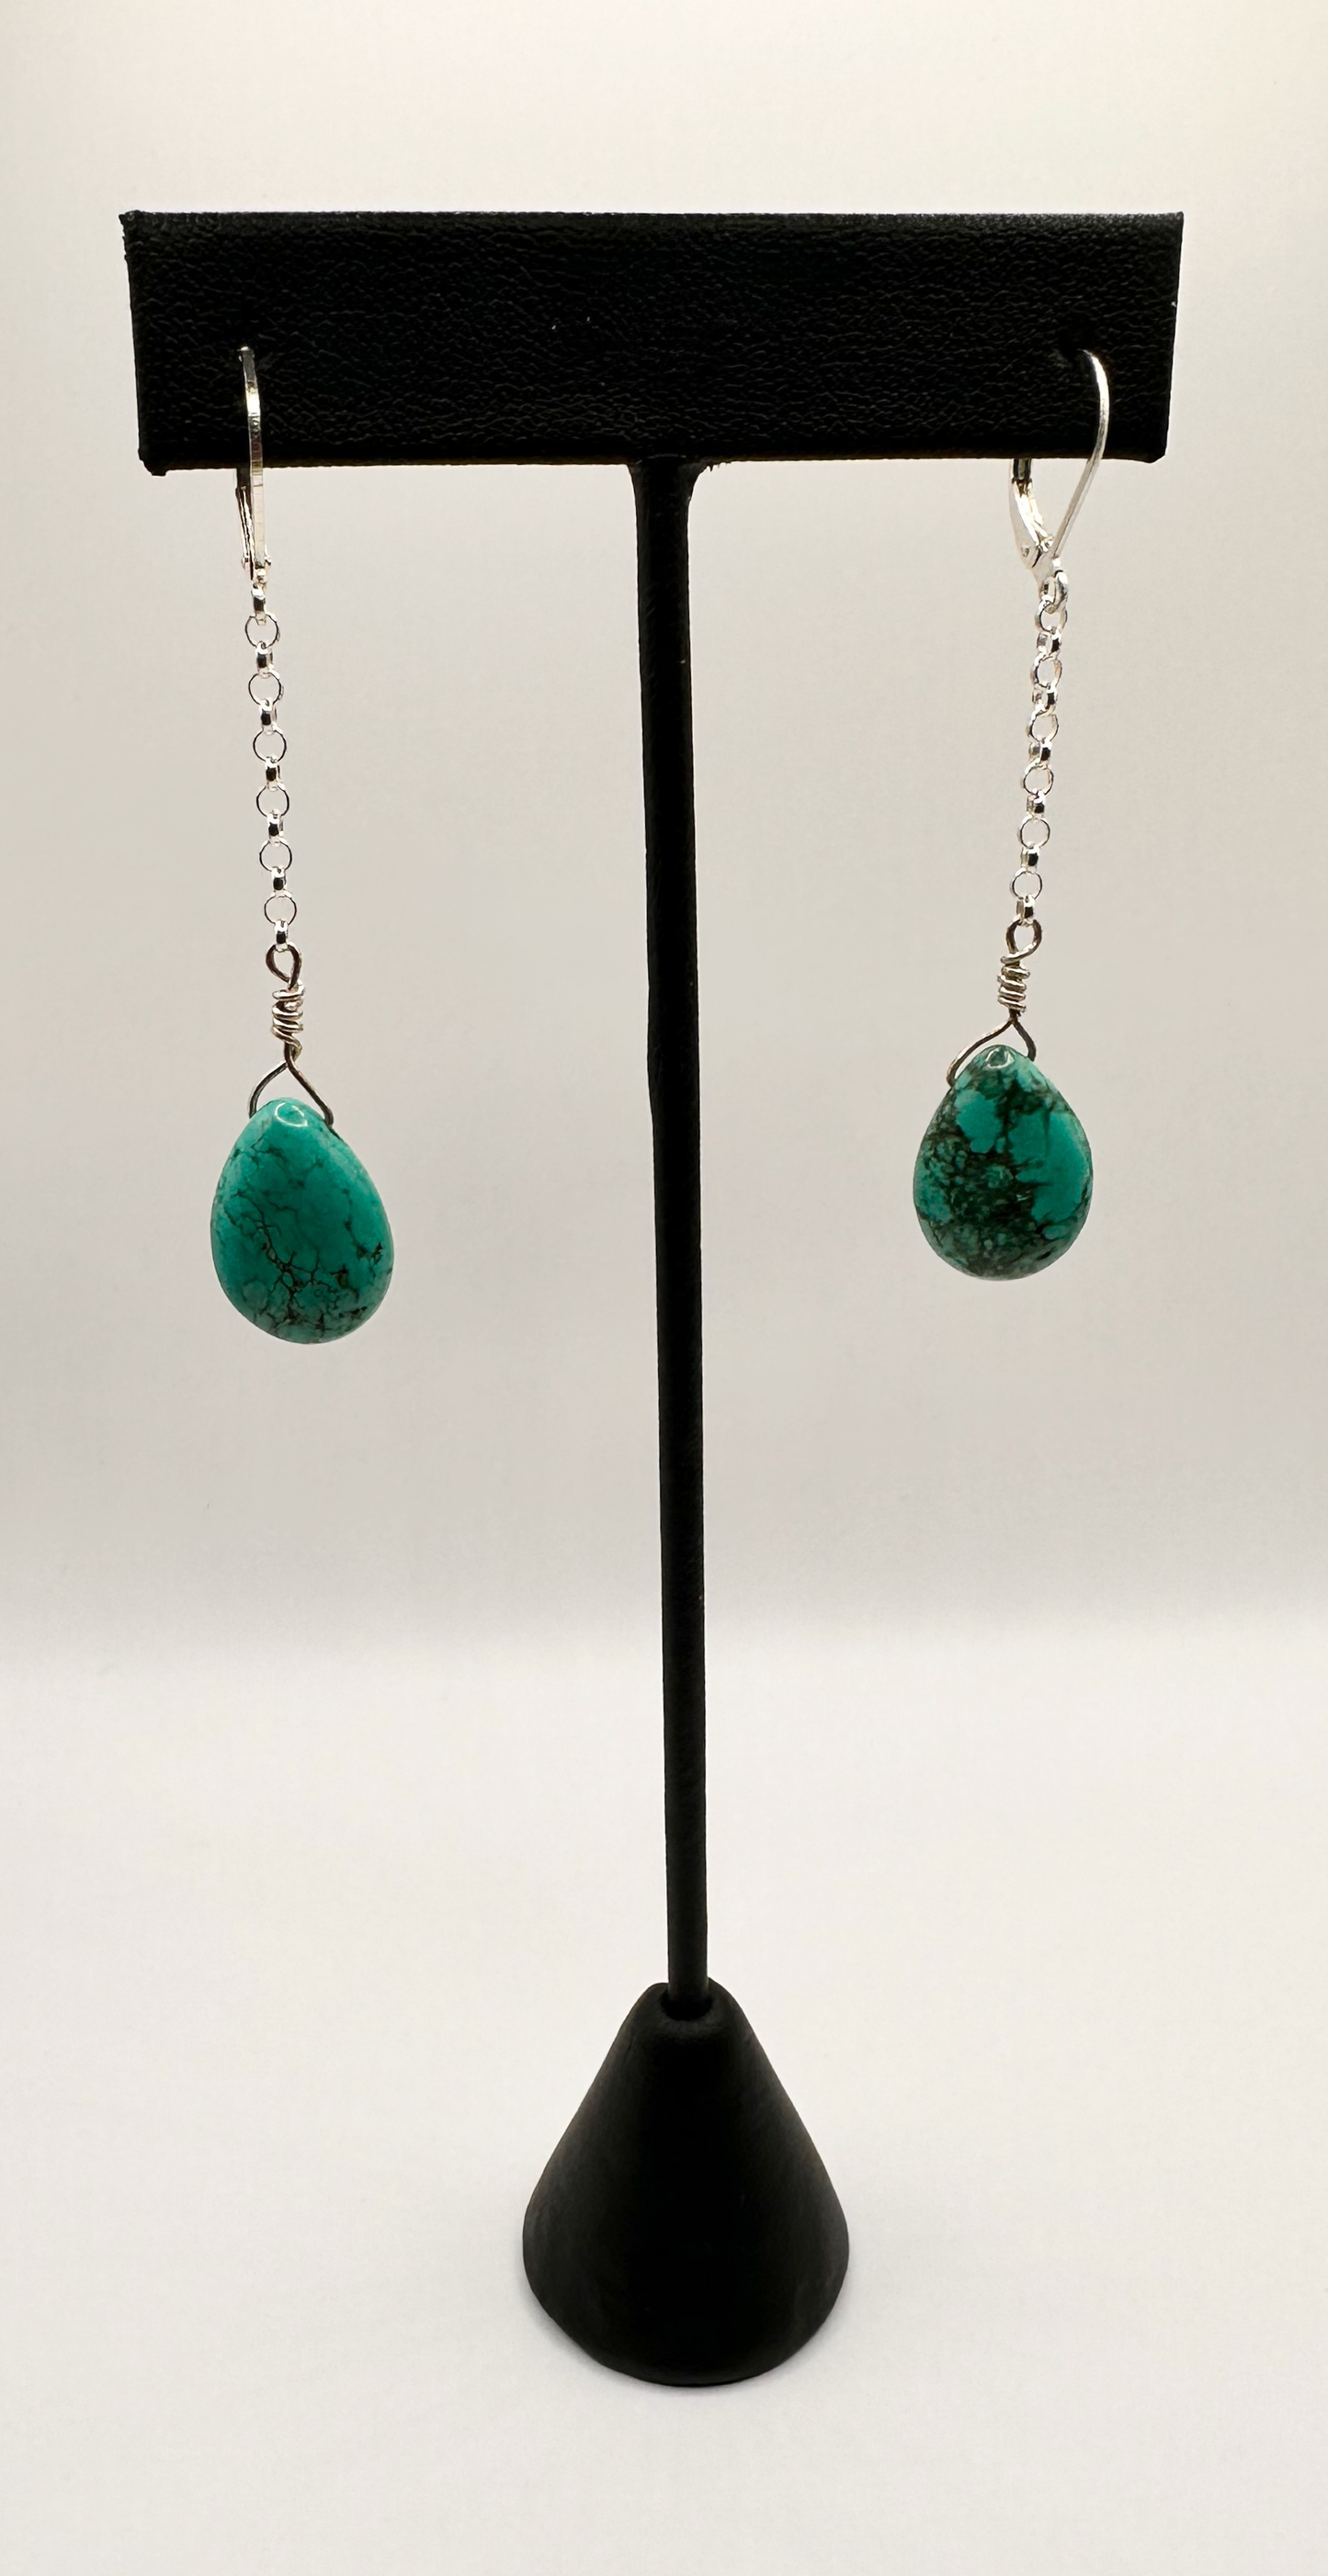 Pear Shaped Turquoise Drop Bead with Sterling Silver Chain Earrings